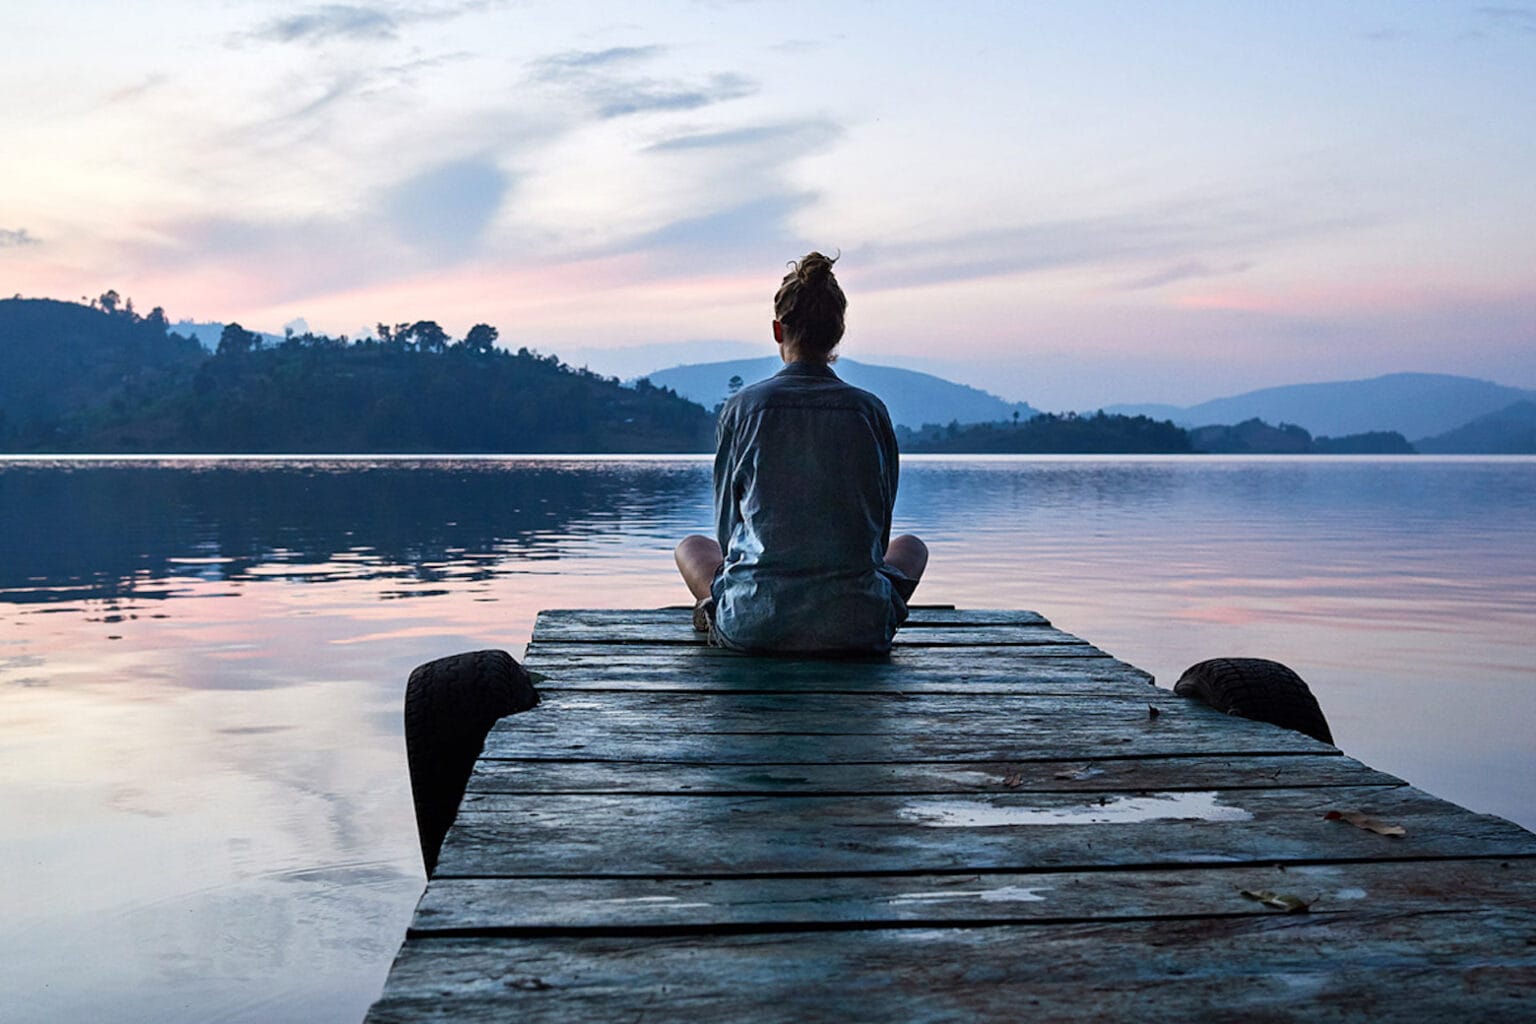 A woman meditating at the end of a boat dock at sunrise or sunset.